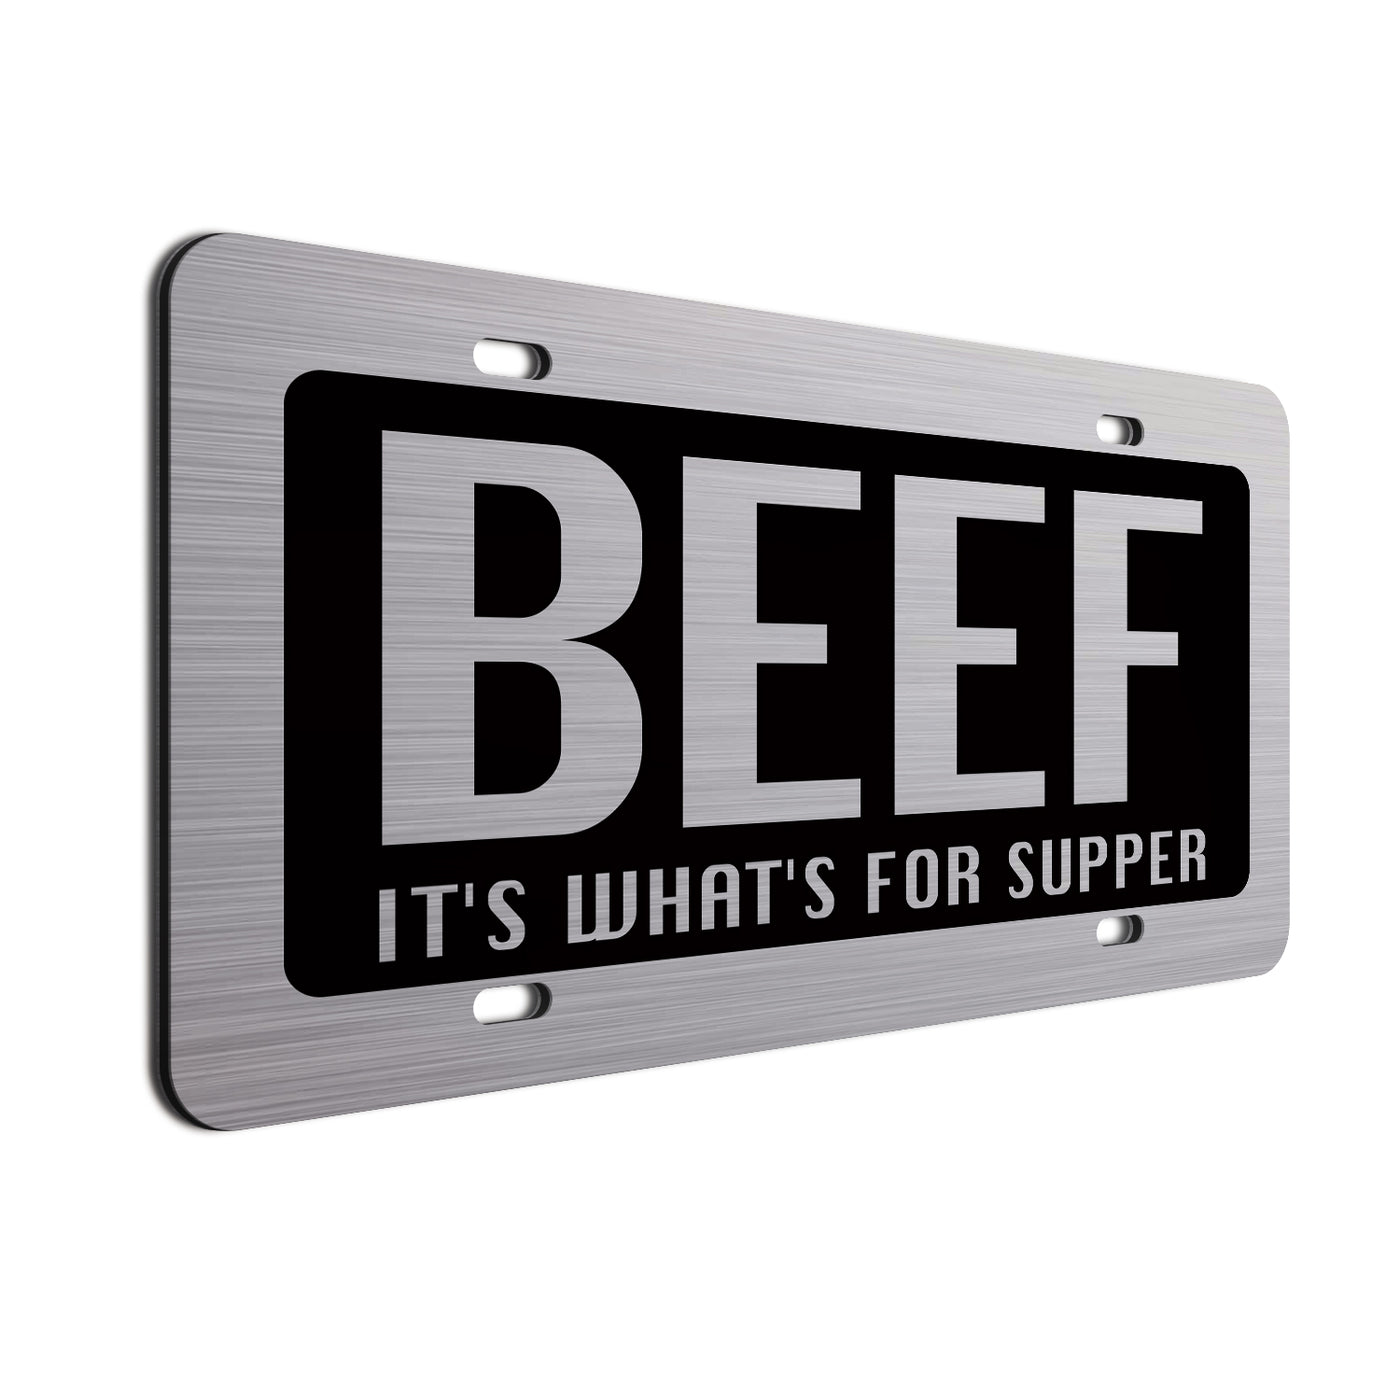  Beef License Plate - It's What's For Supper: Black